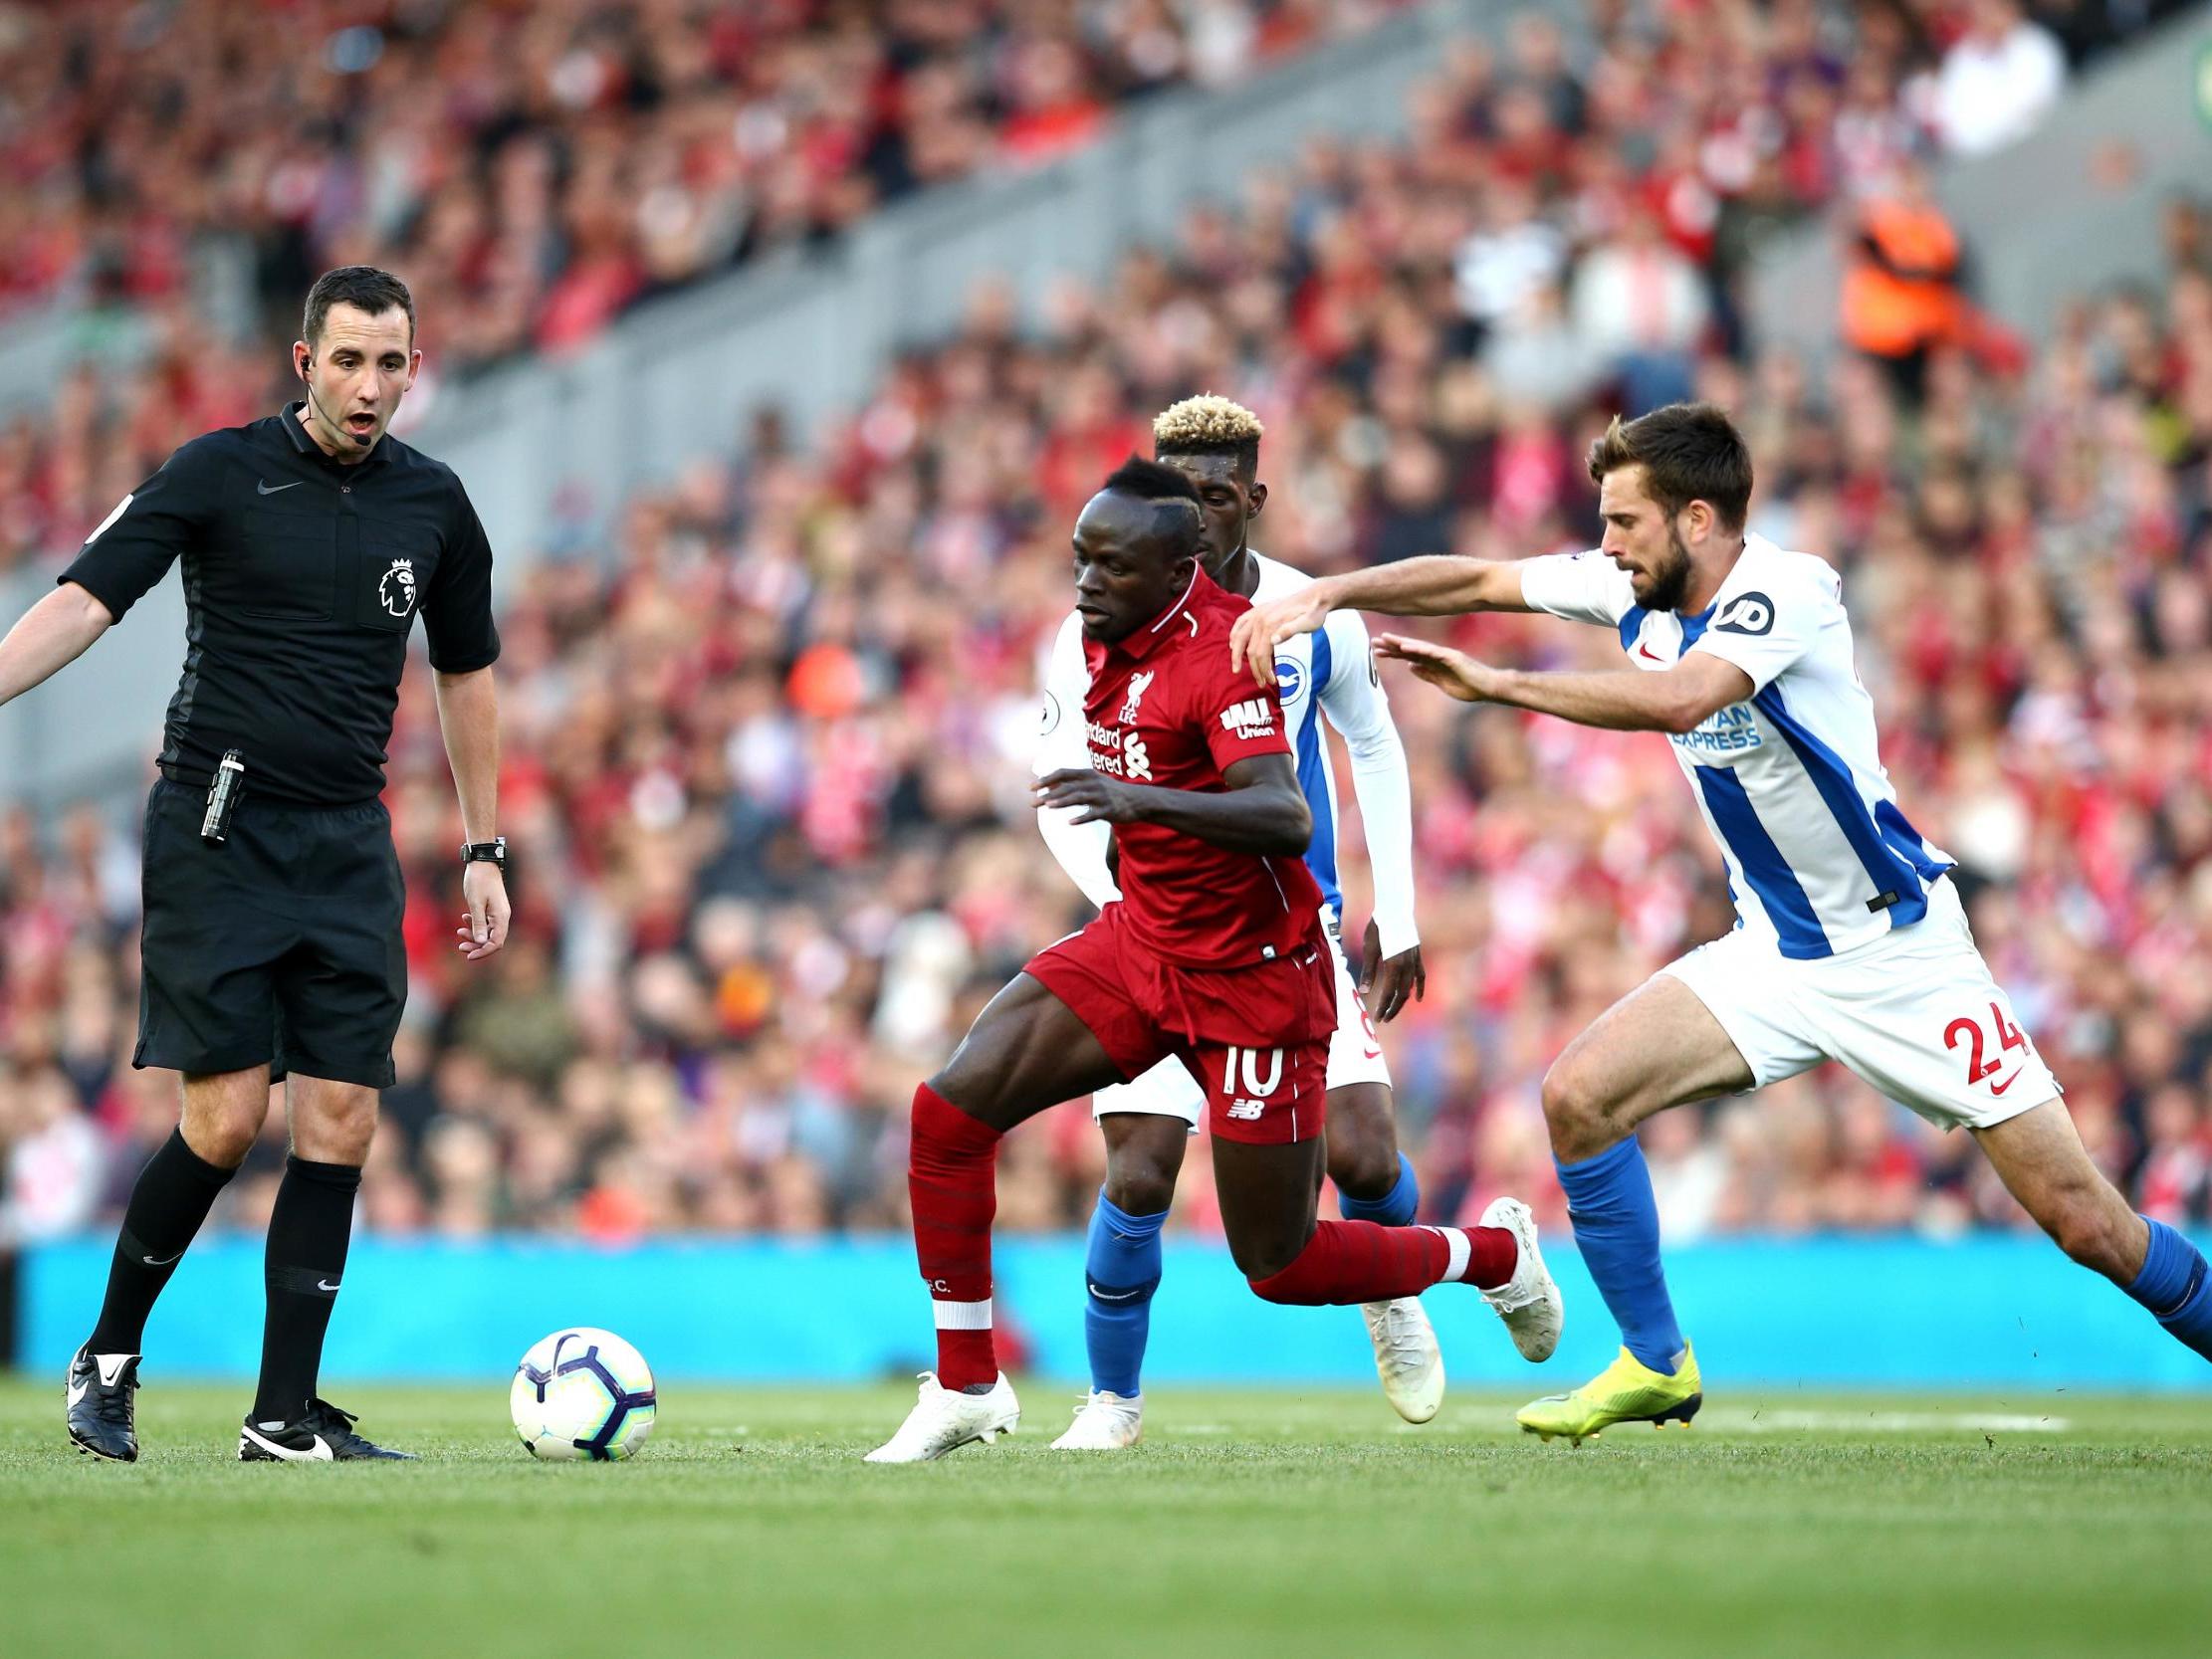 Sadio Mane attempts to get away from Yves Bissouma and Davy Proepper